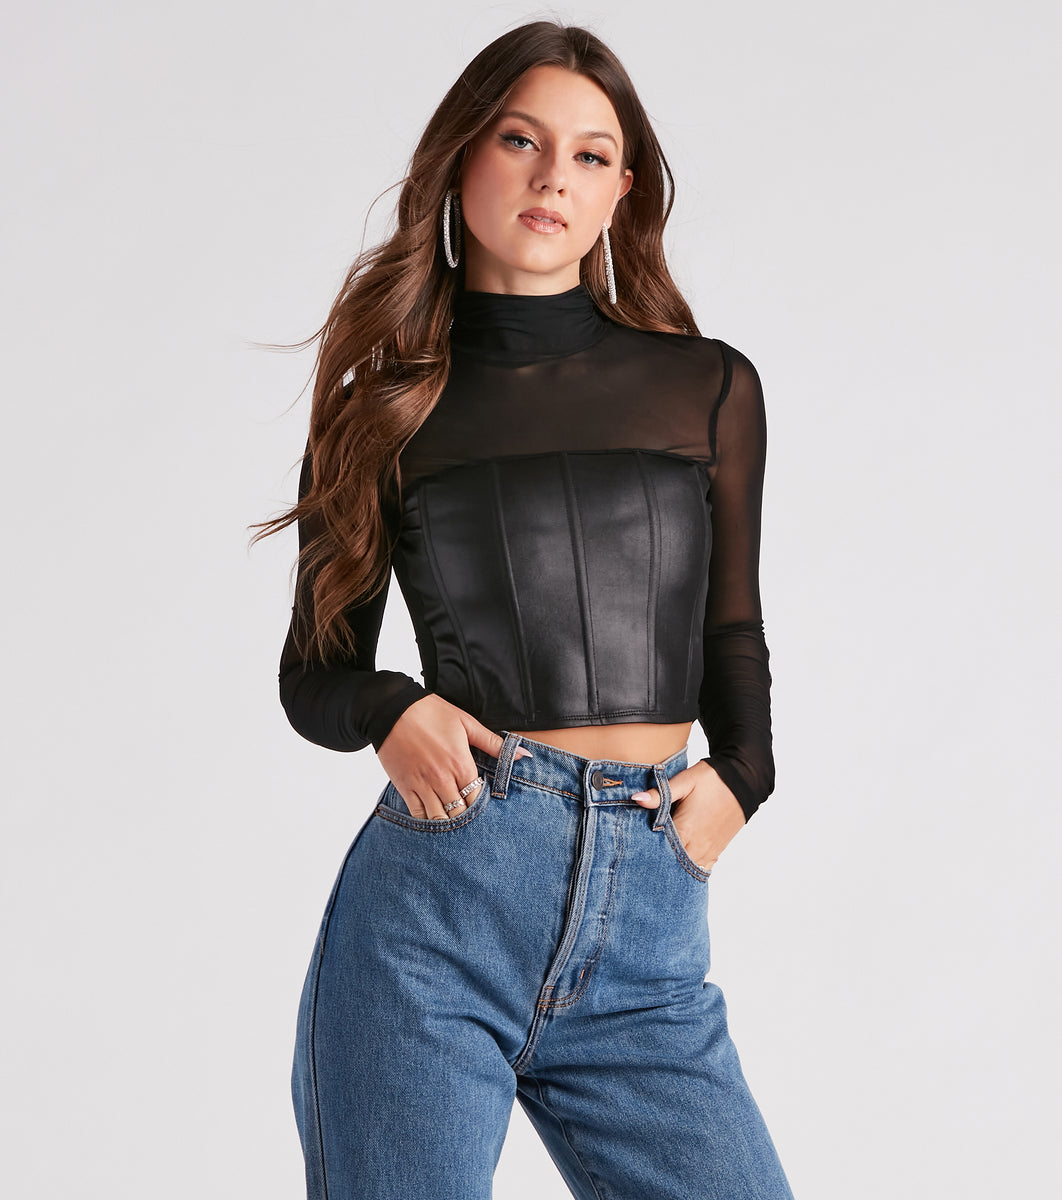 Total Grunge Faux Leather Corset Mesh Top & Windsor